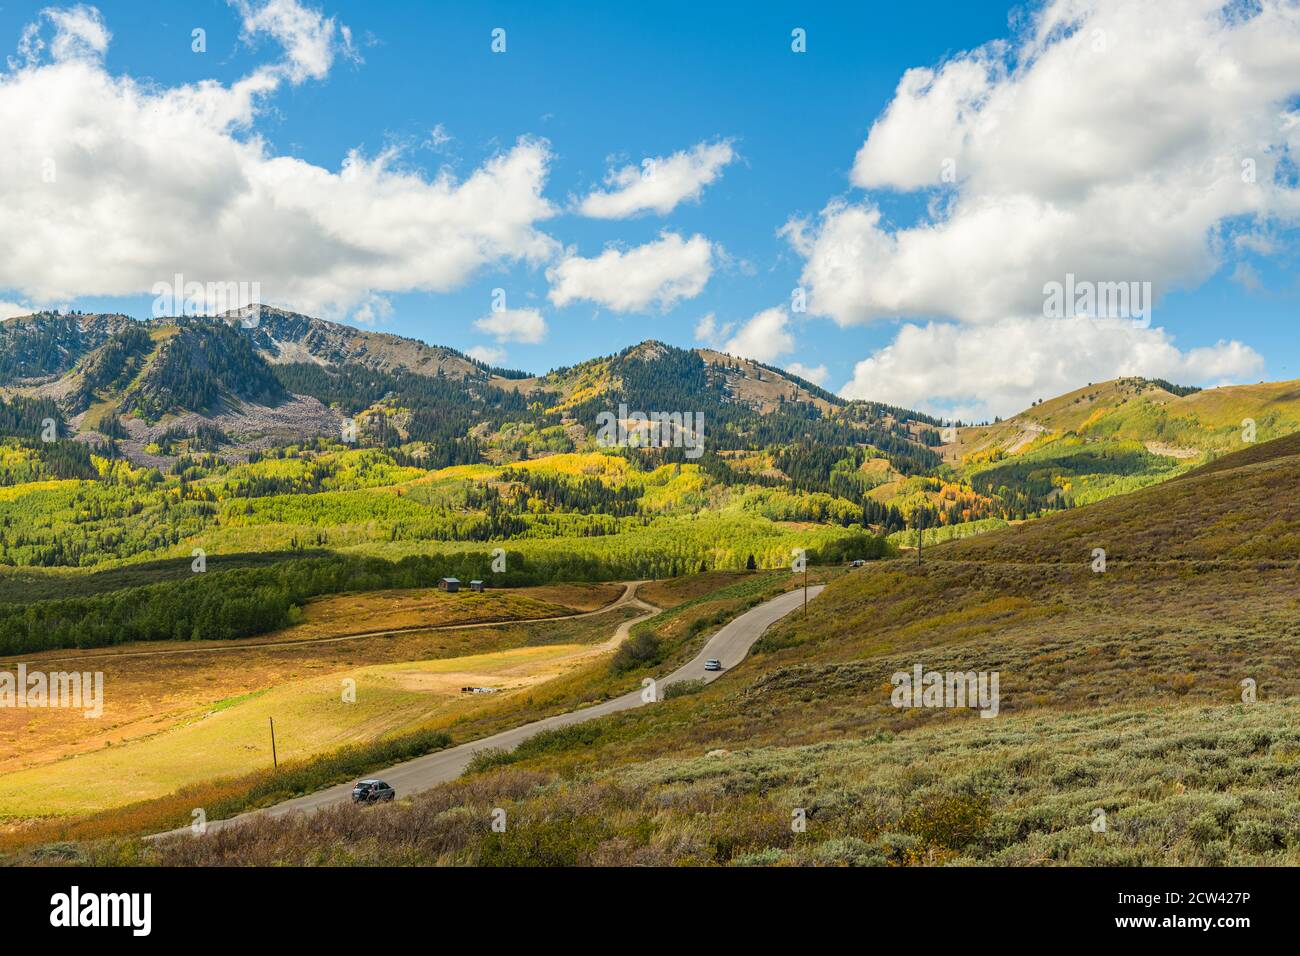 Park City, Utah, USA scenic road and landscape in autumn. Stock Photo